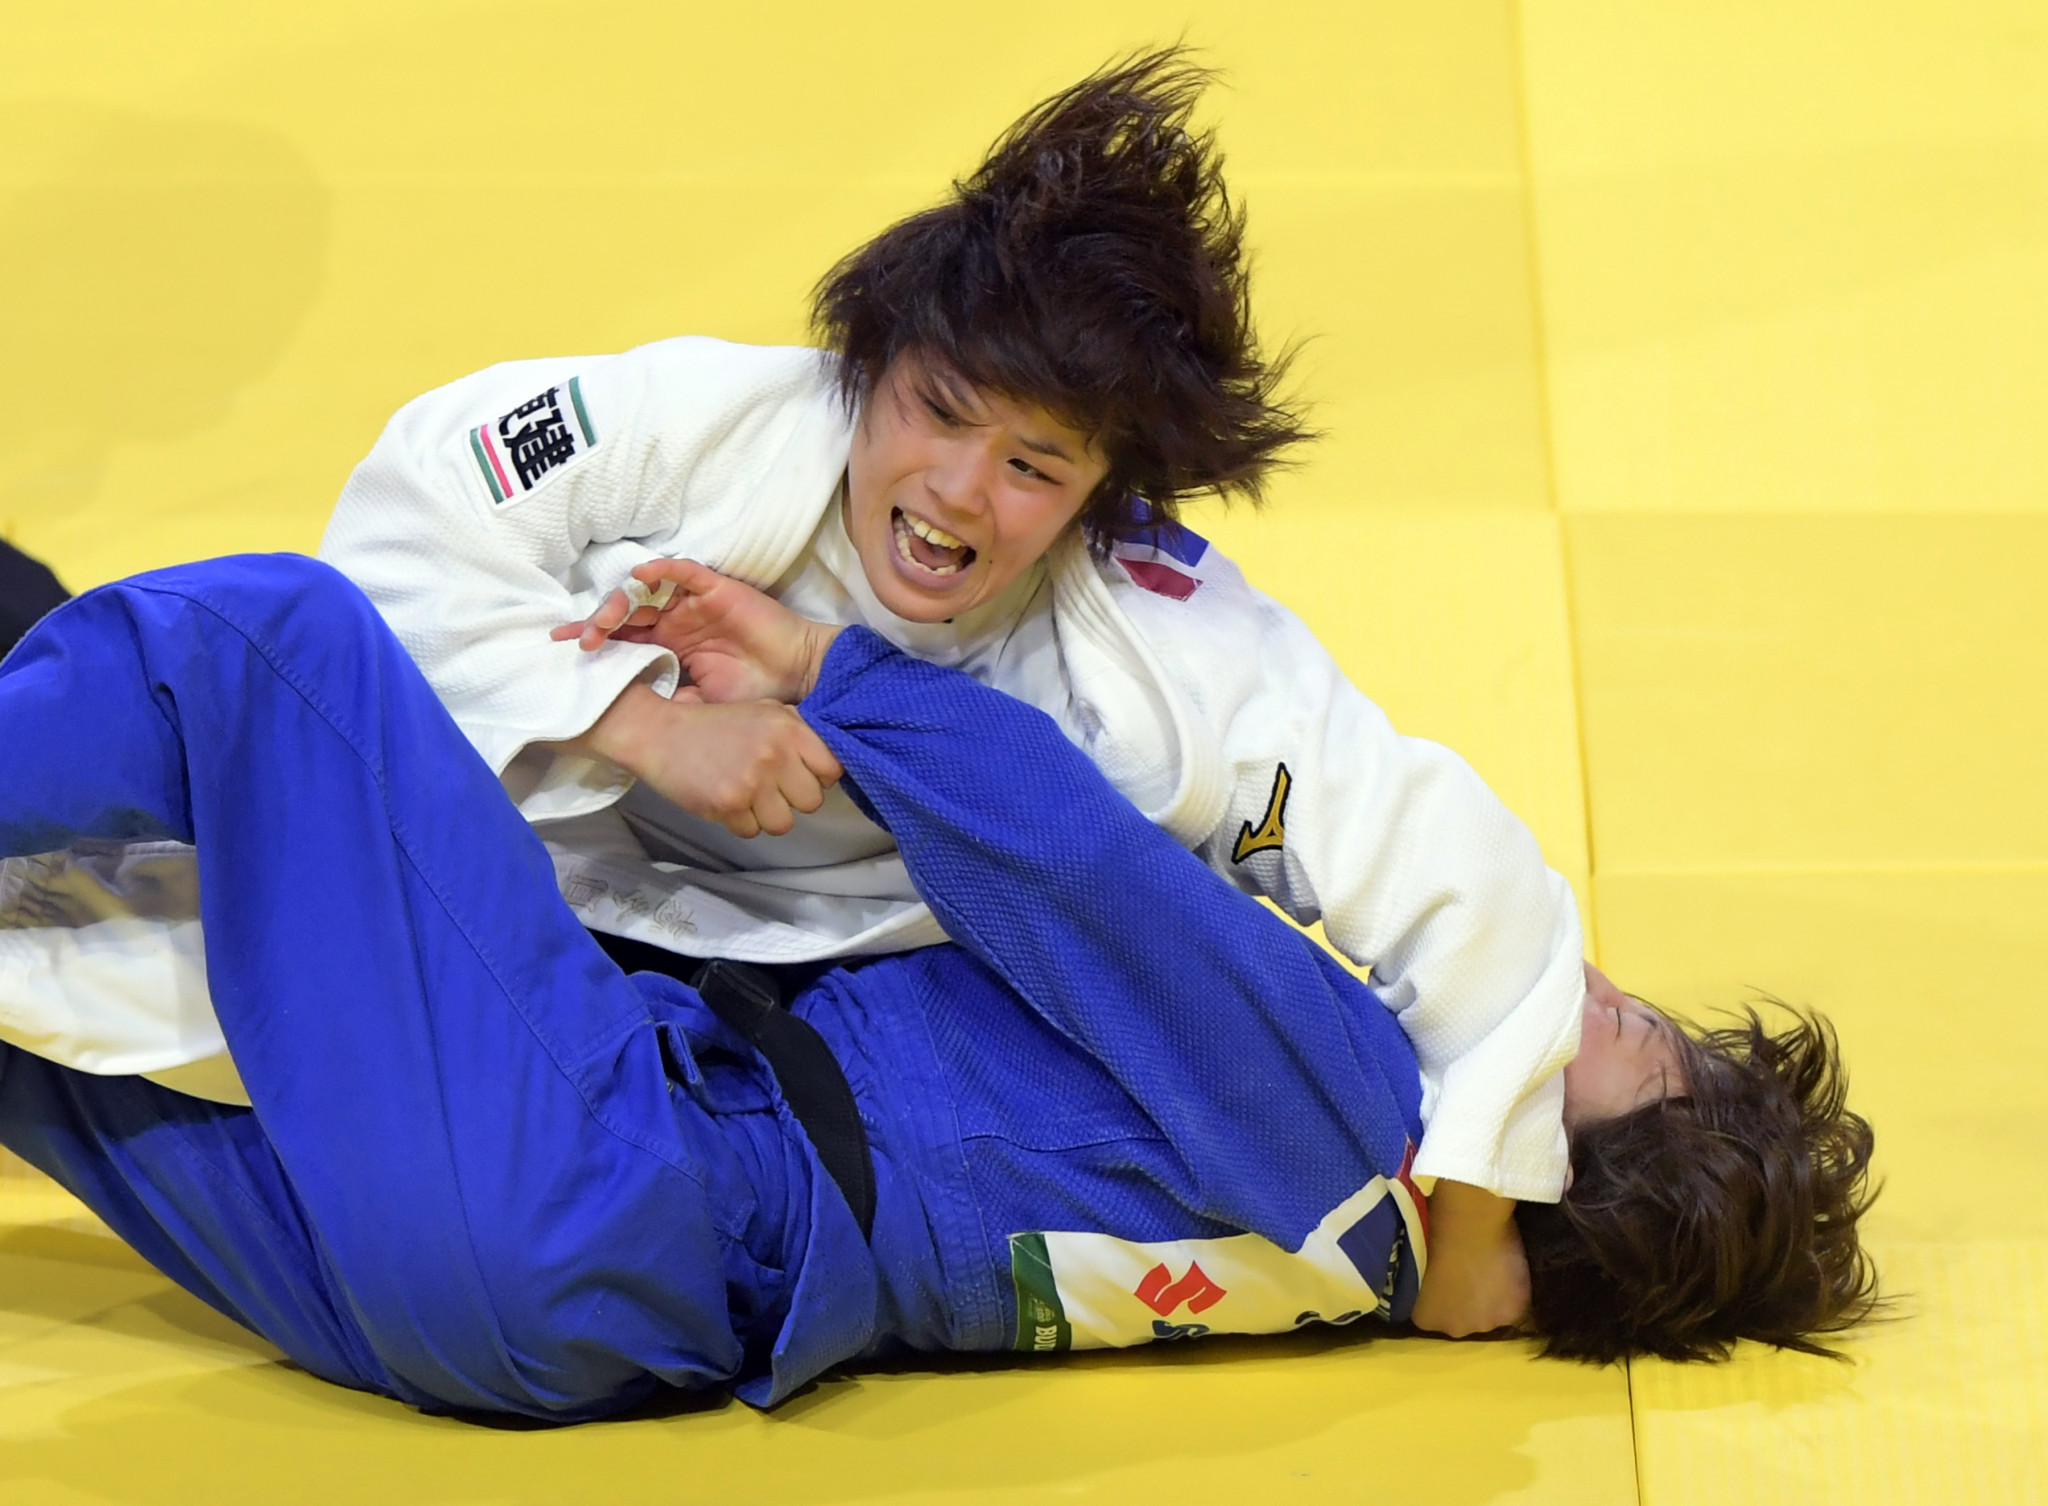 Ai Shishime beat compatriot Natsumi Tsunoda to win the under 52kg title ©Getty Images